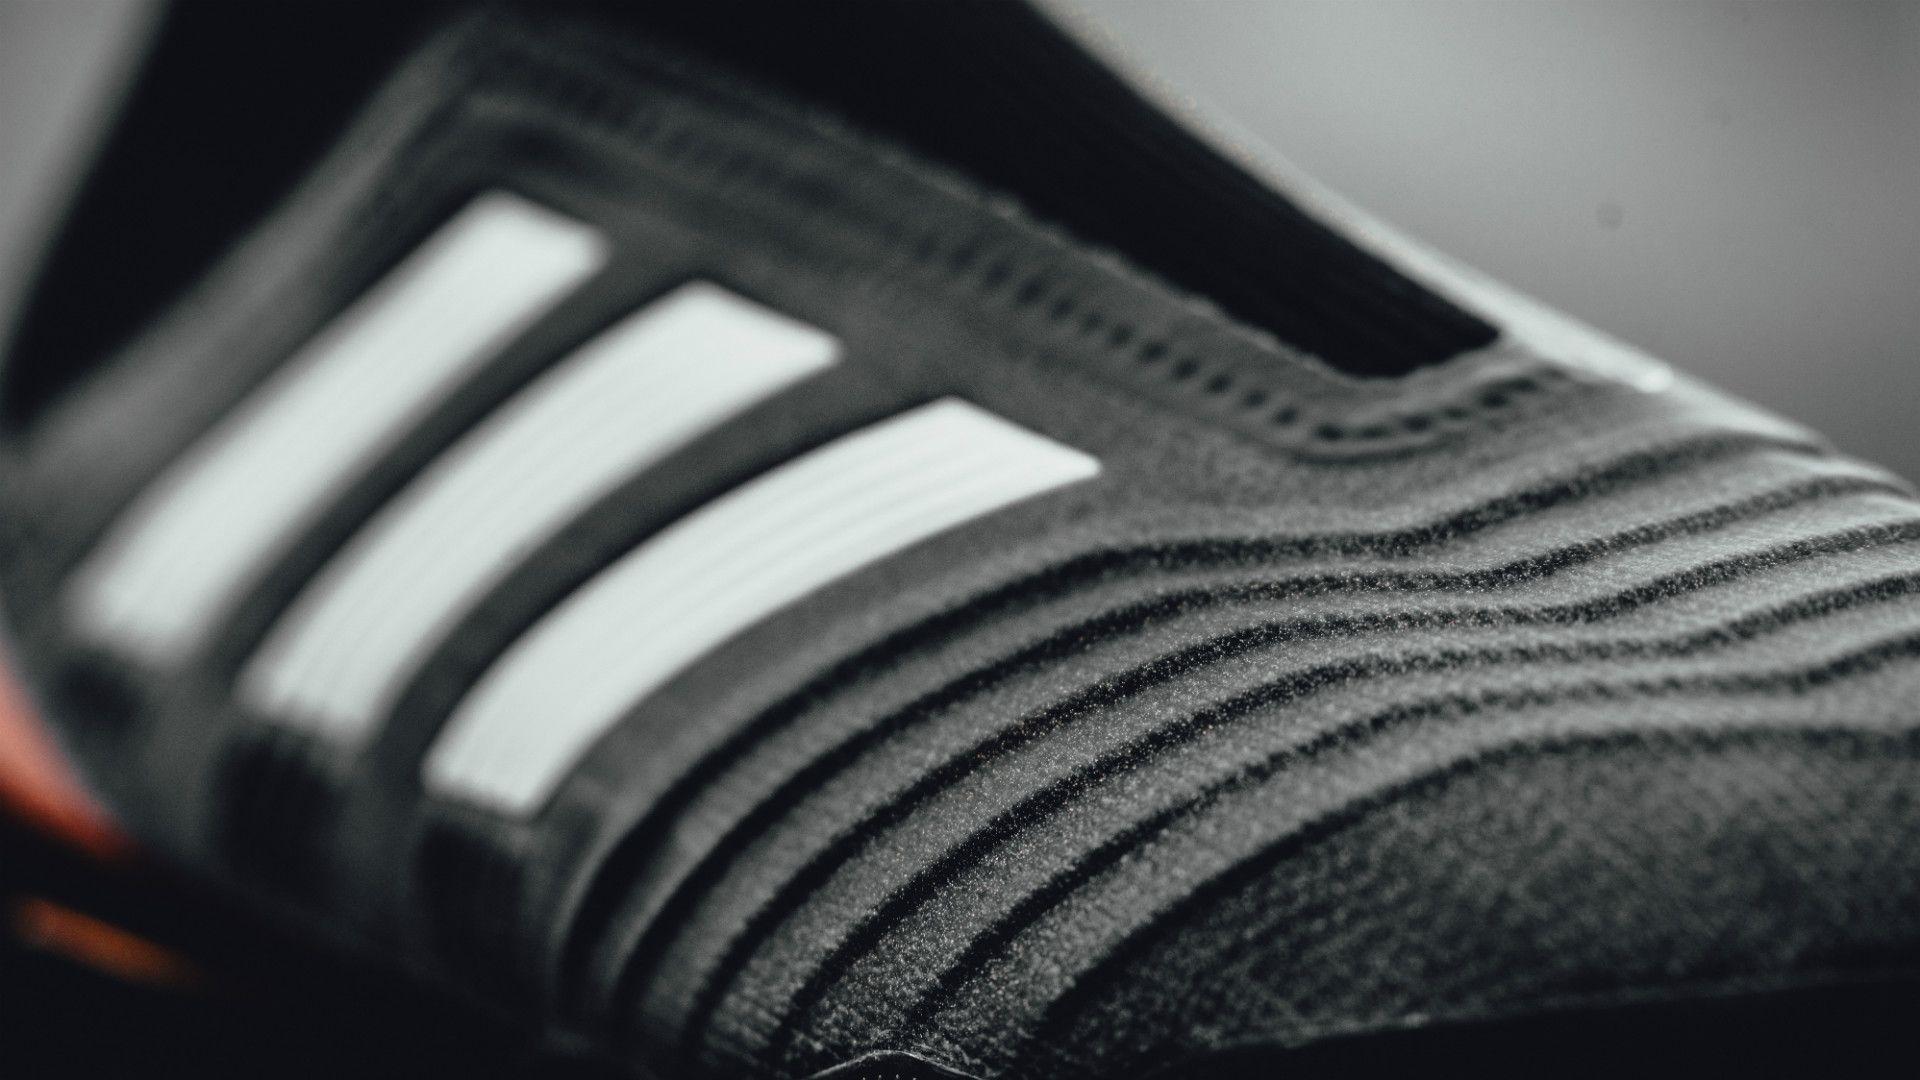 Adidas Predator 18+: Iconic Boots Re Launched For Pogba, Ozil & Dele